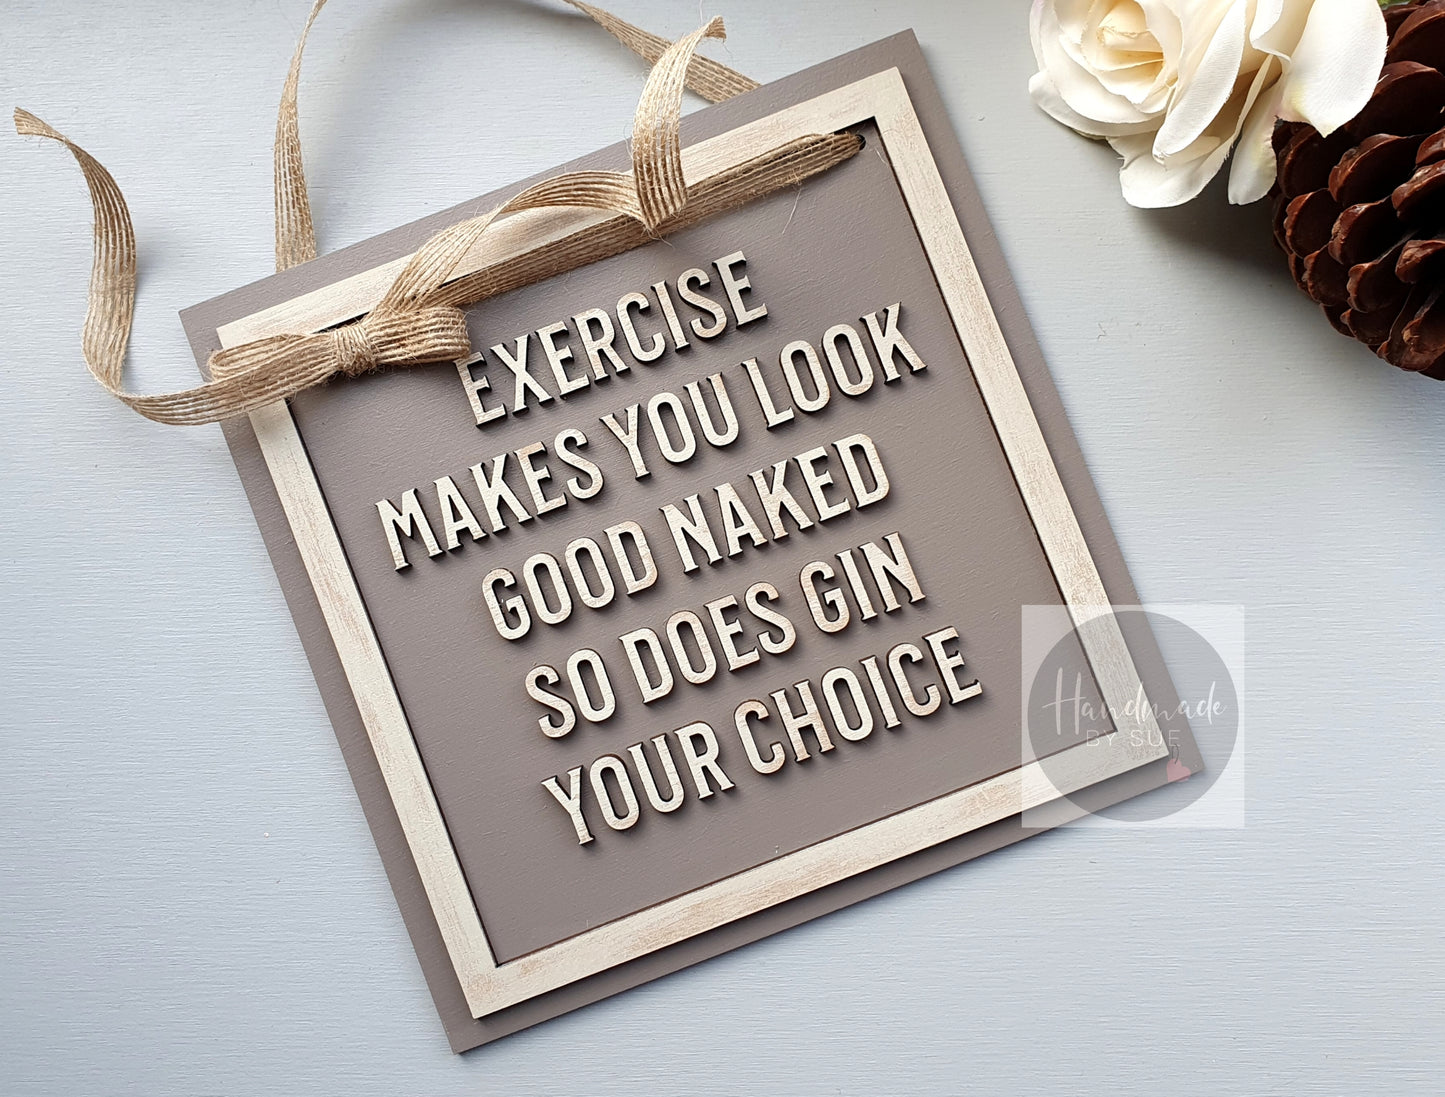 Exercise Makes You Look ... Square Sign